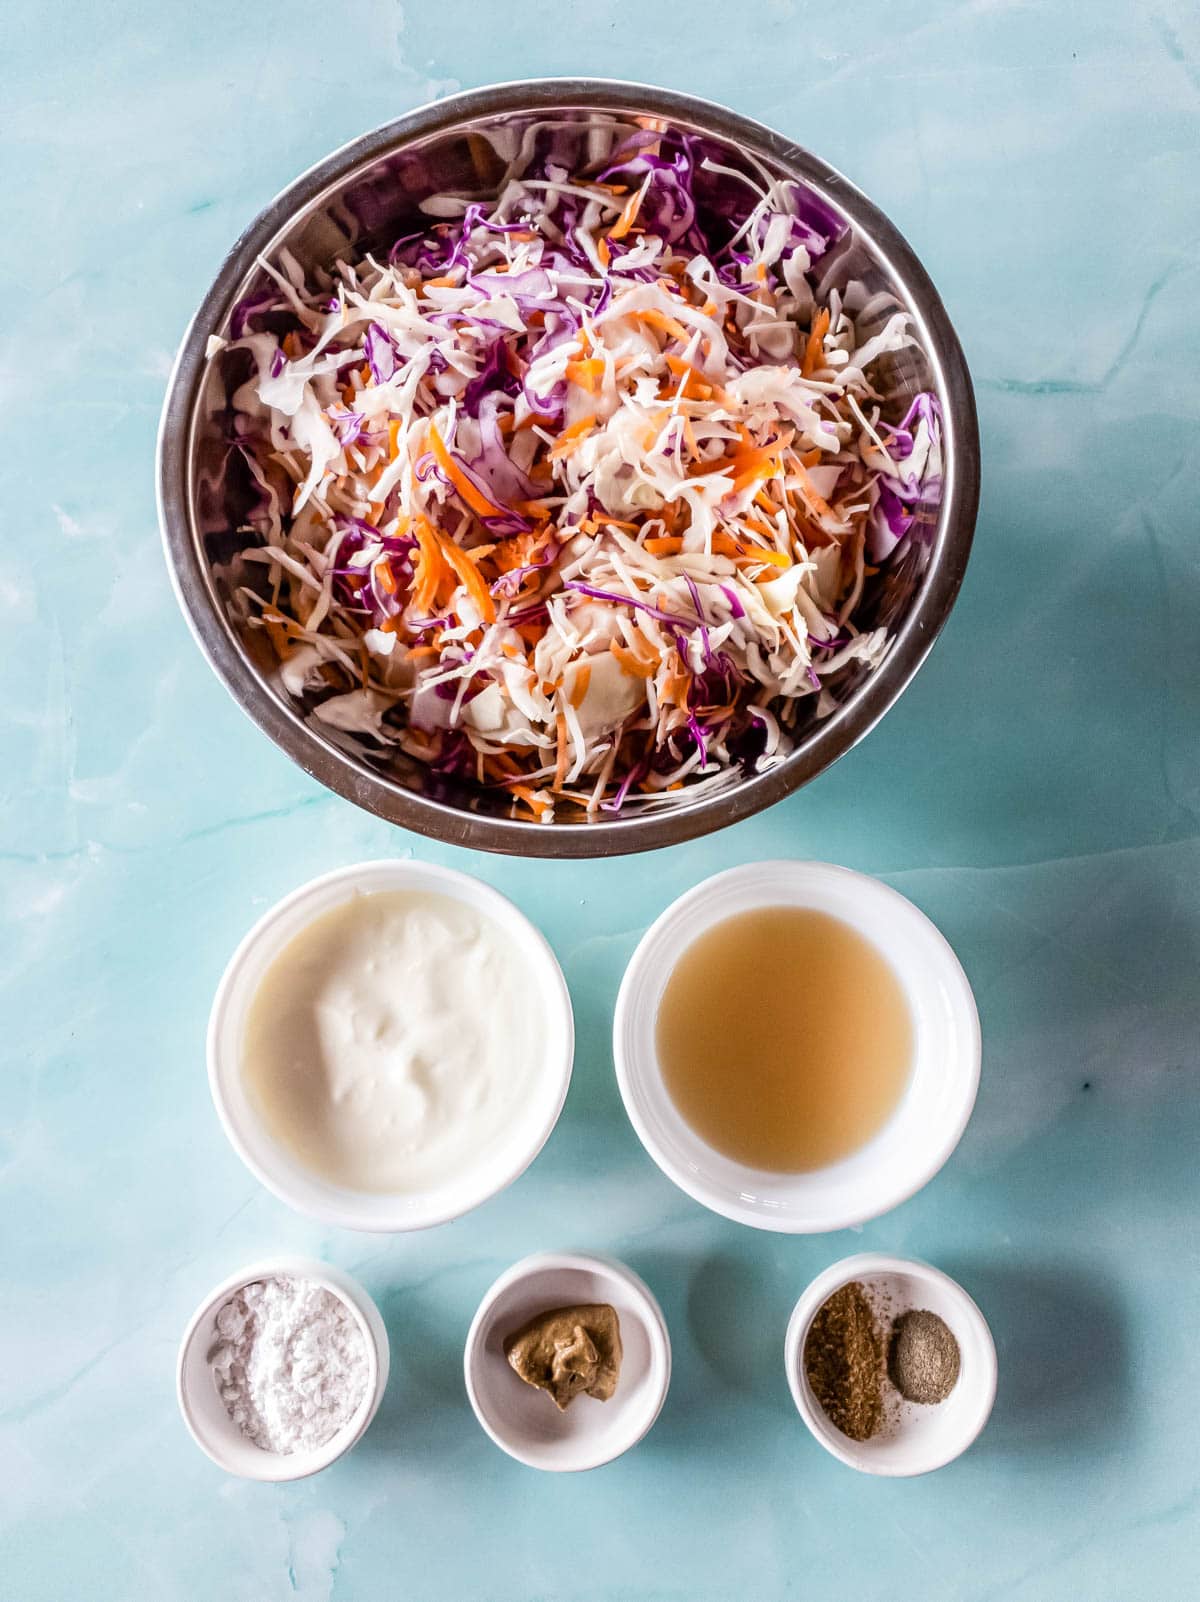 A picture of keto coleslaw recipe ingredients on blue background.